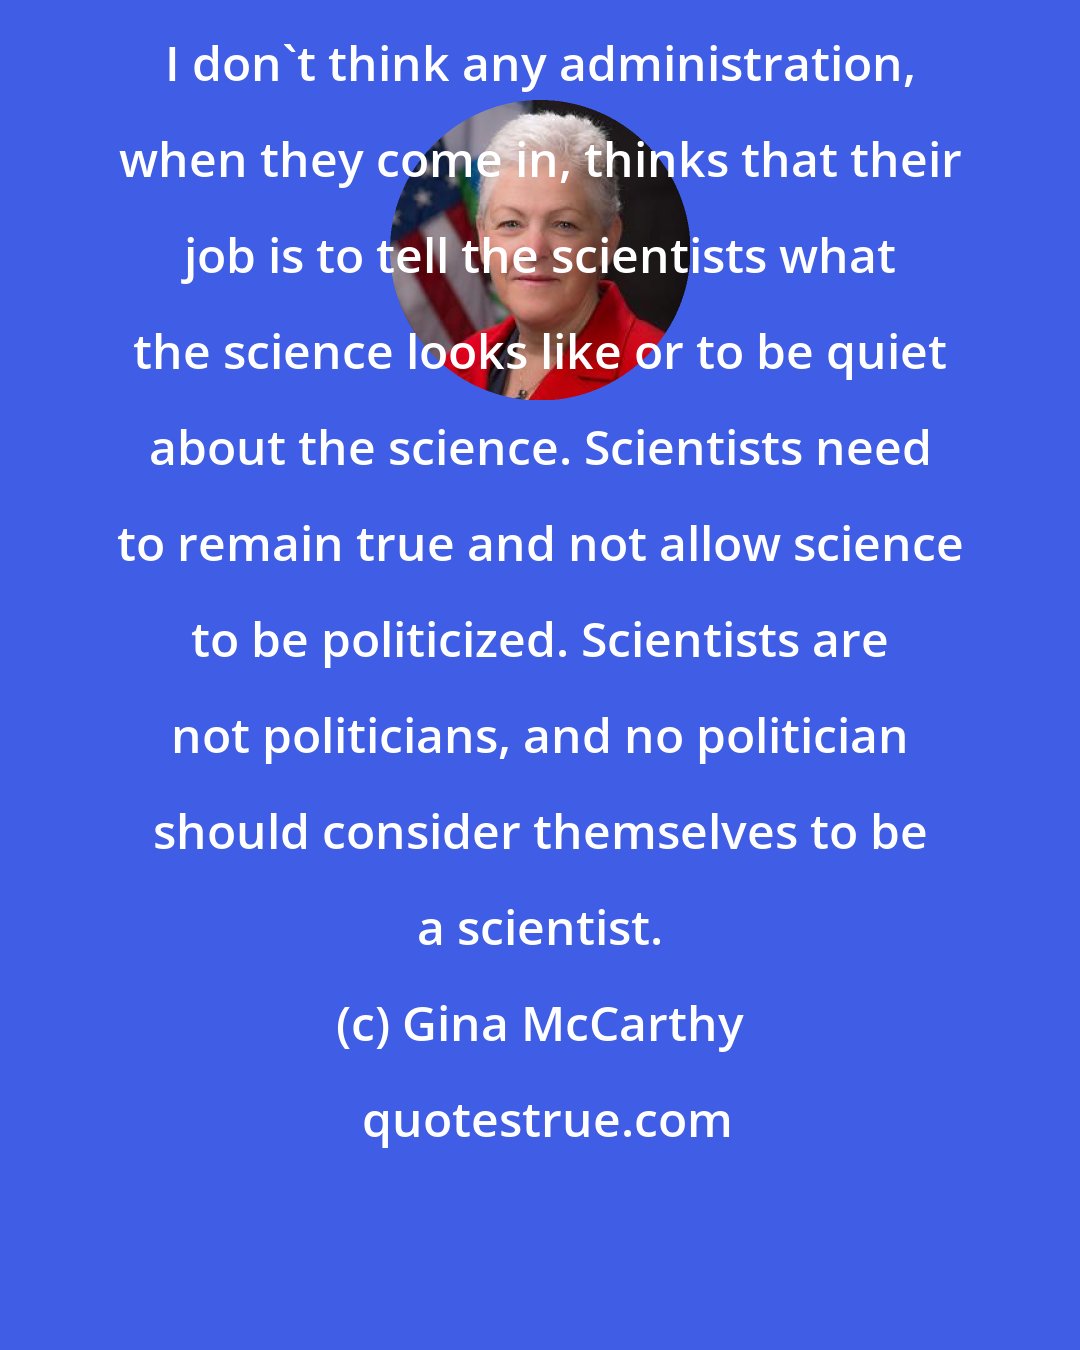 Gina McCarthy: I don't think any administration, when they come in, thinks that their job is to tell the scientists what the science looks like or to be quiet about the science. Scientists need to remain true and not allow science to be politicized. Scientists are not politicians, and no politician should consider themselves to be a scientist.